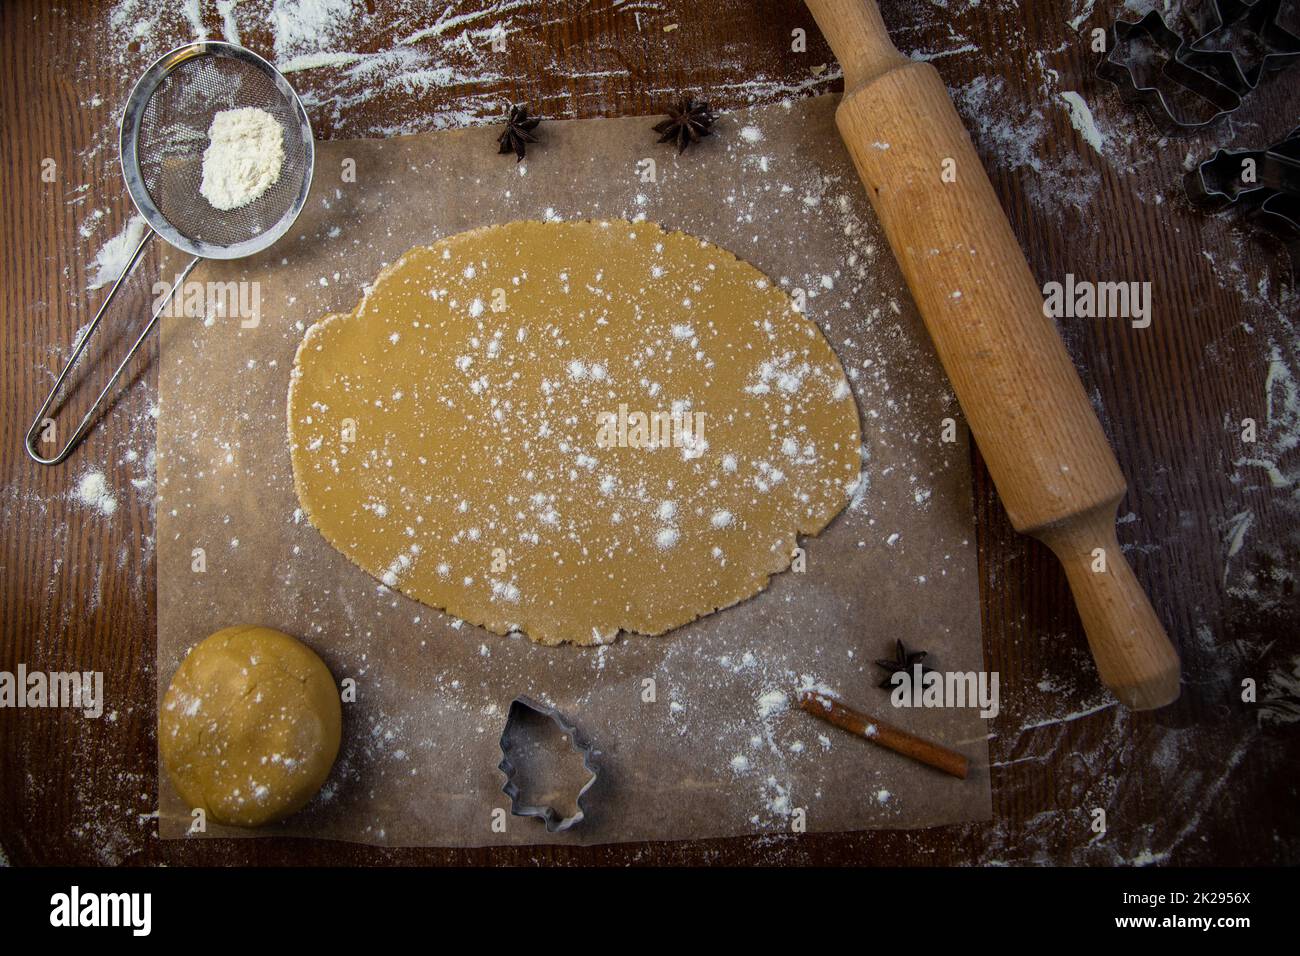 There is a rolled dough on the parchment, next to it is a lump of dough, a rolling pin, cookie cutters, cinnamon, everything is strewn with flour on a dark background Stock Photo